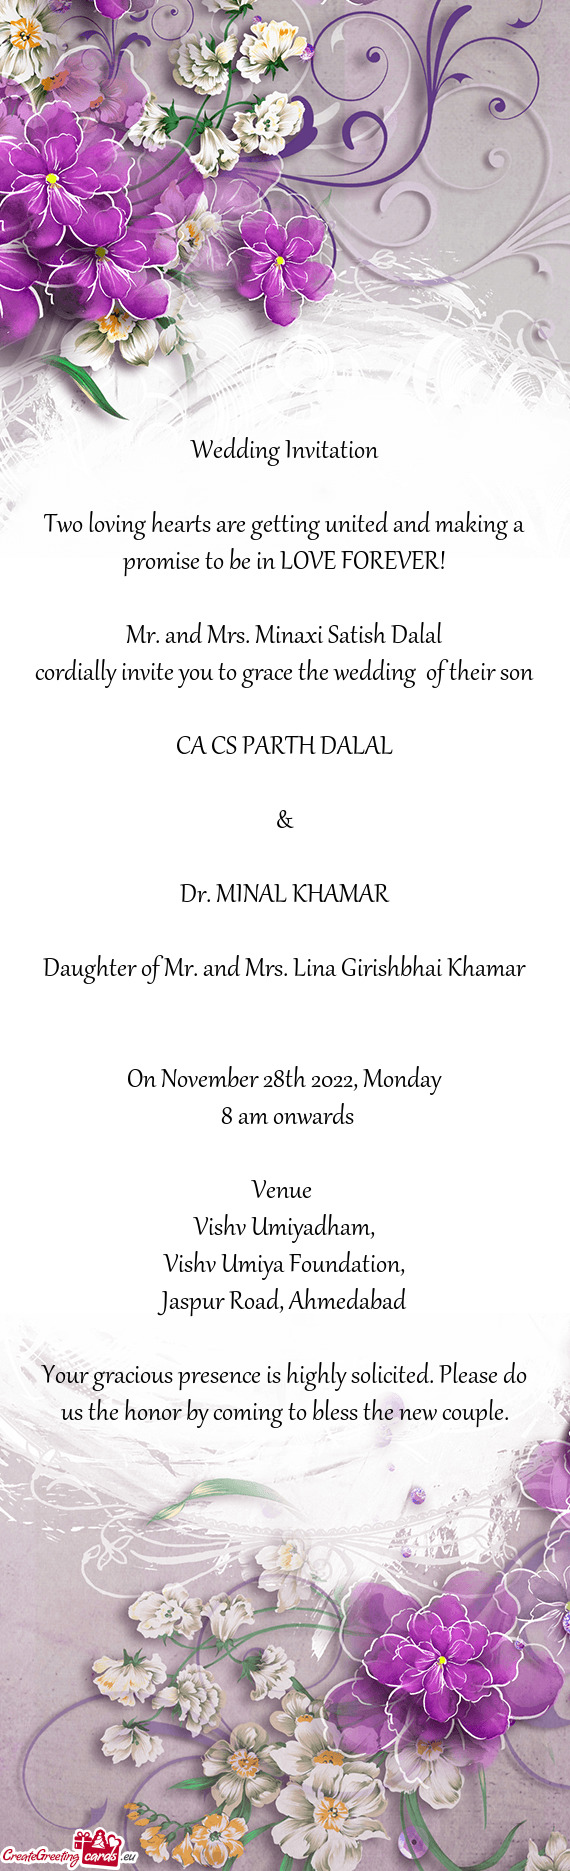 Cordially invite you to grace the wedding of their son